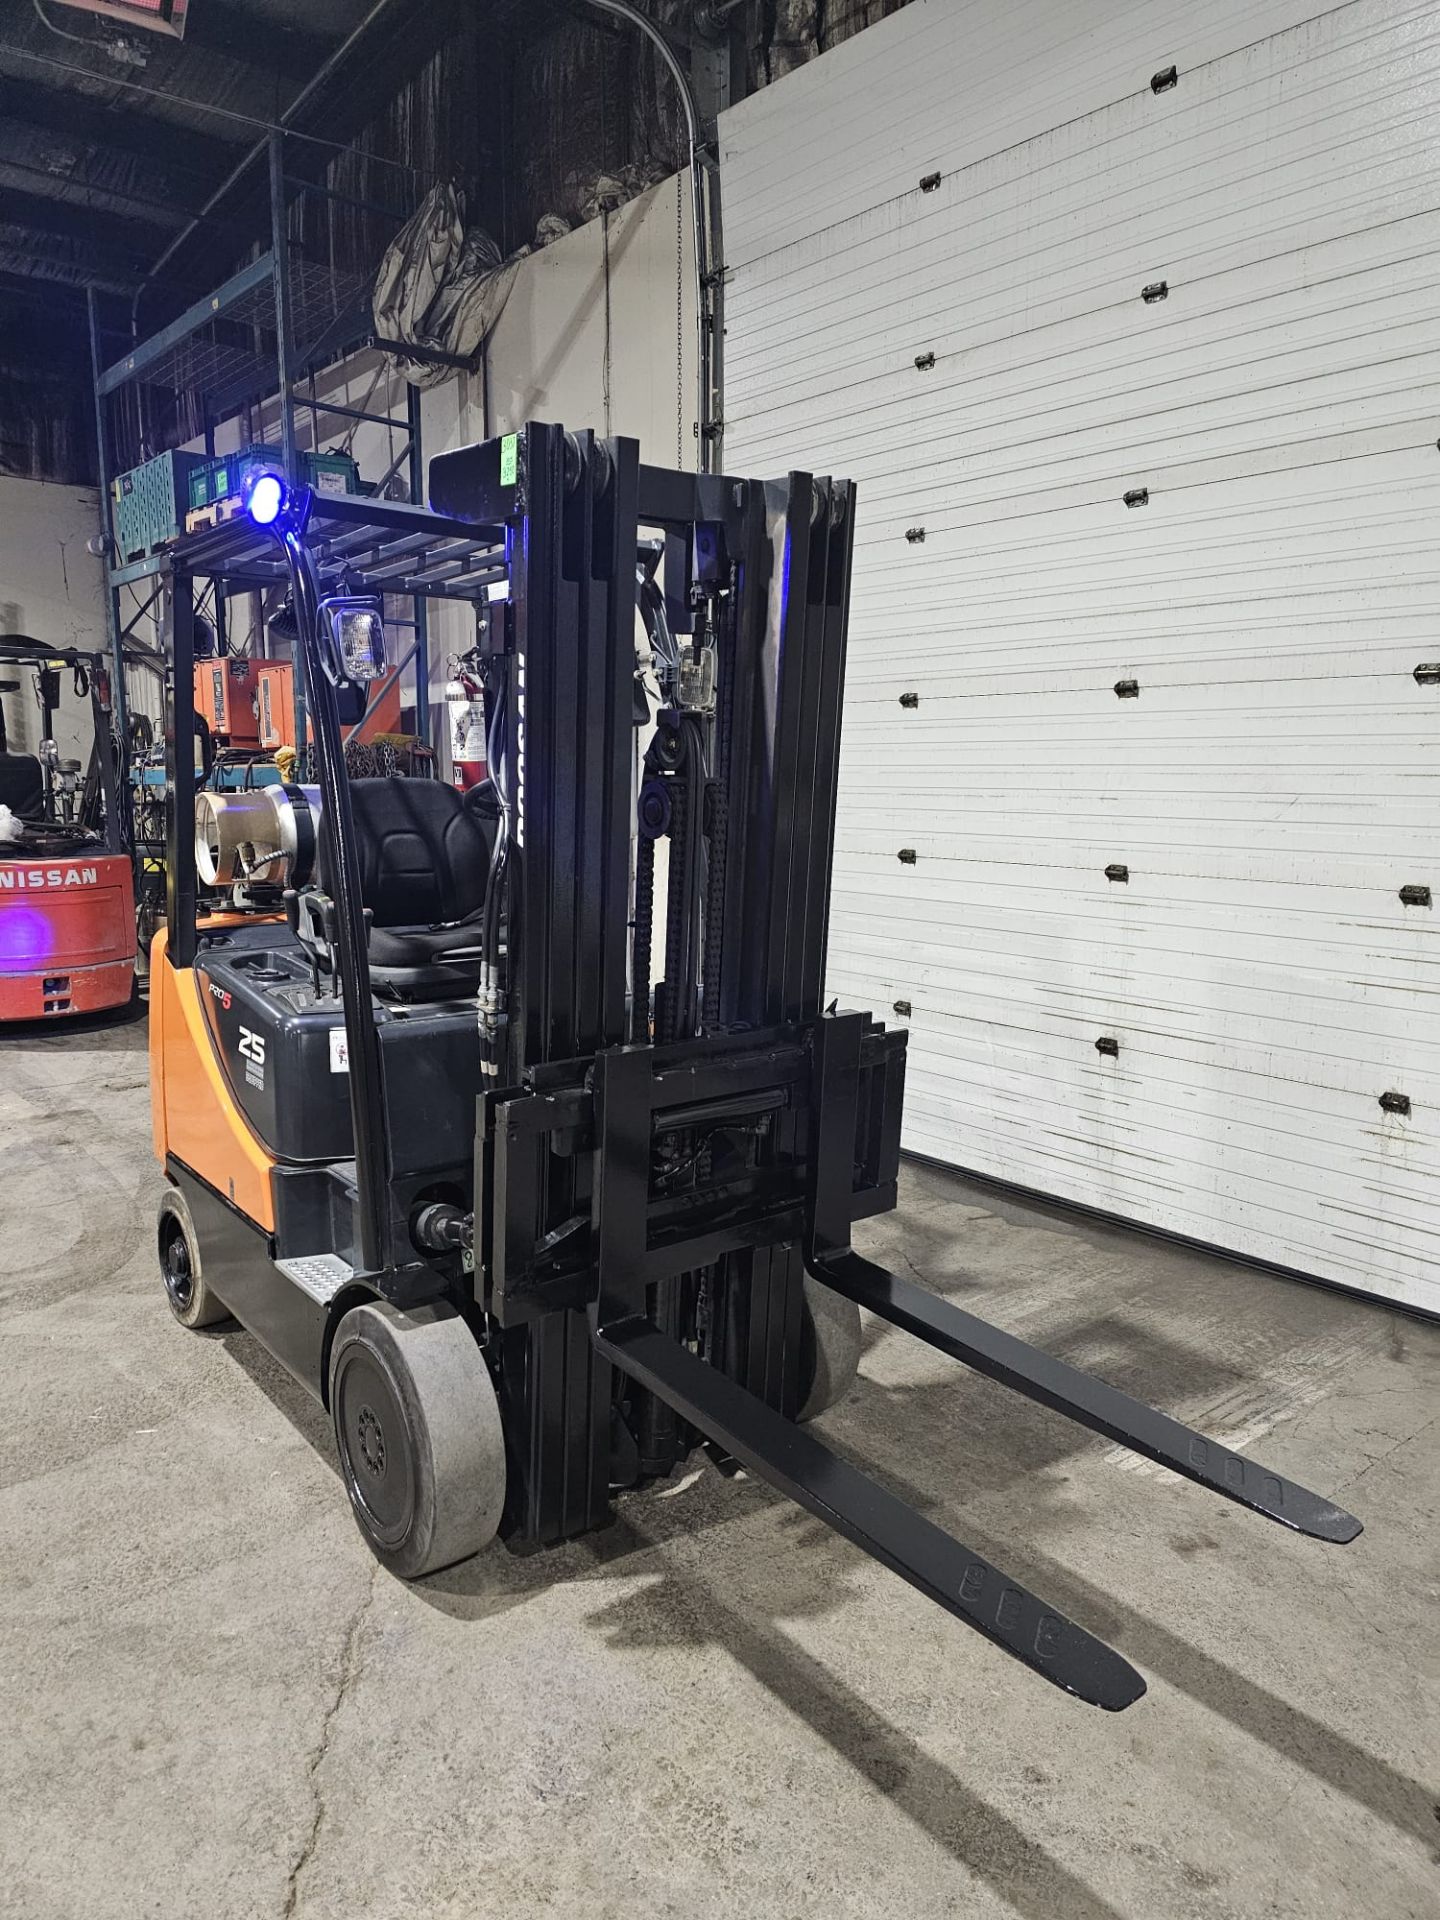 2015 DOOSAN 5,000lbs Capacity LPG (Propane) Forklift with sideshift 3-STAGE MAST with 189" LOAD - Image 4 of 5